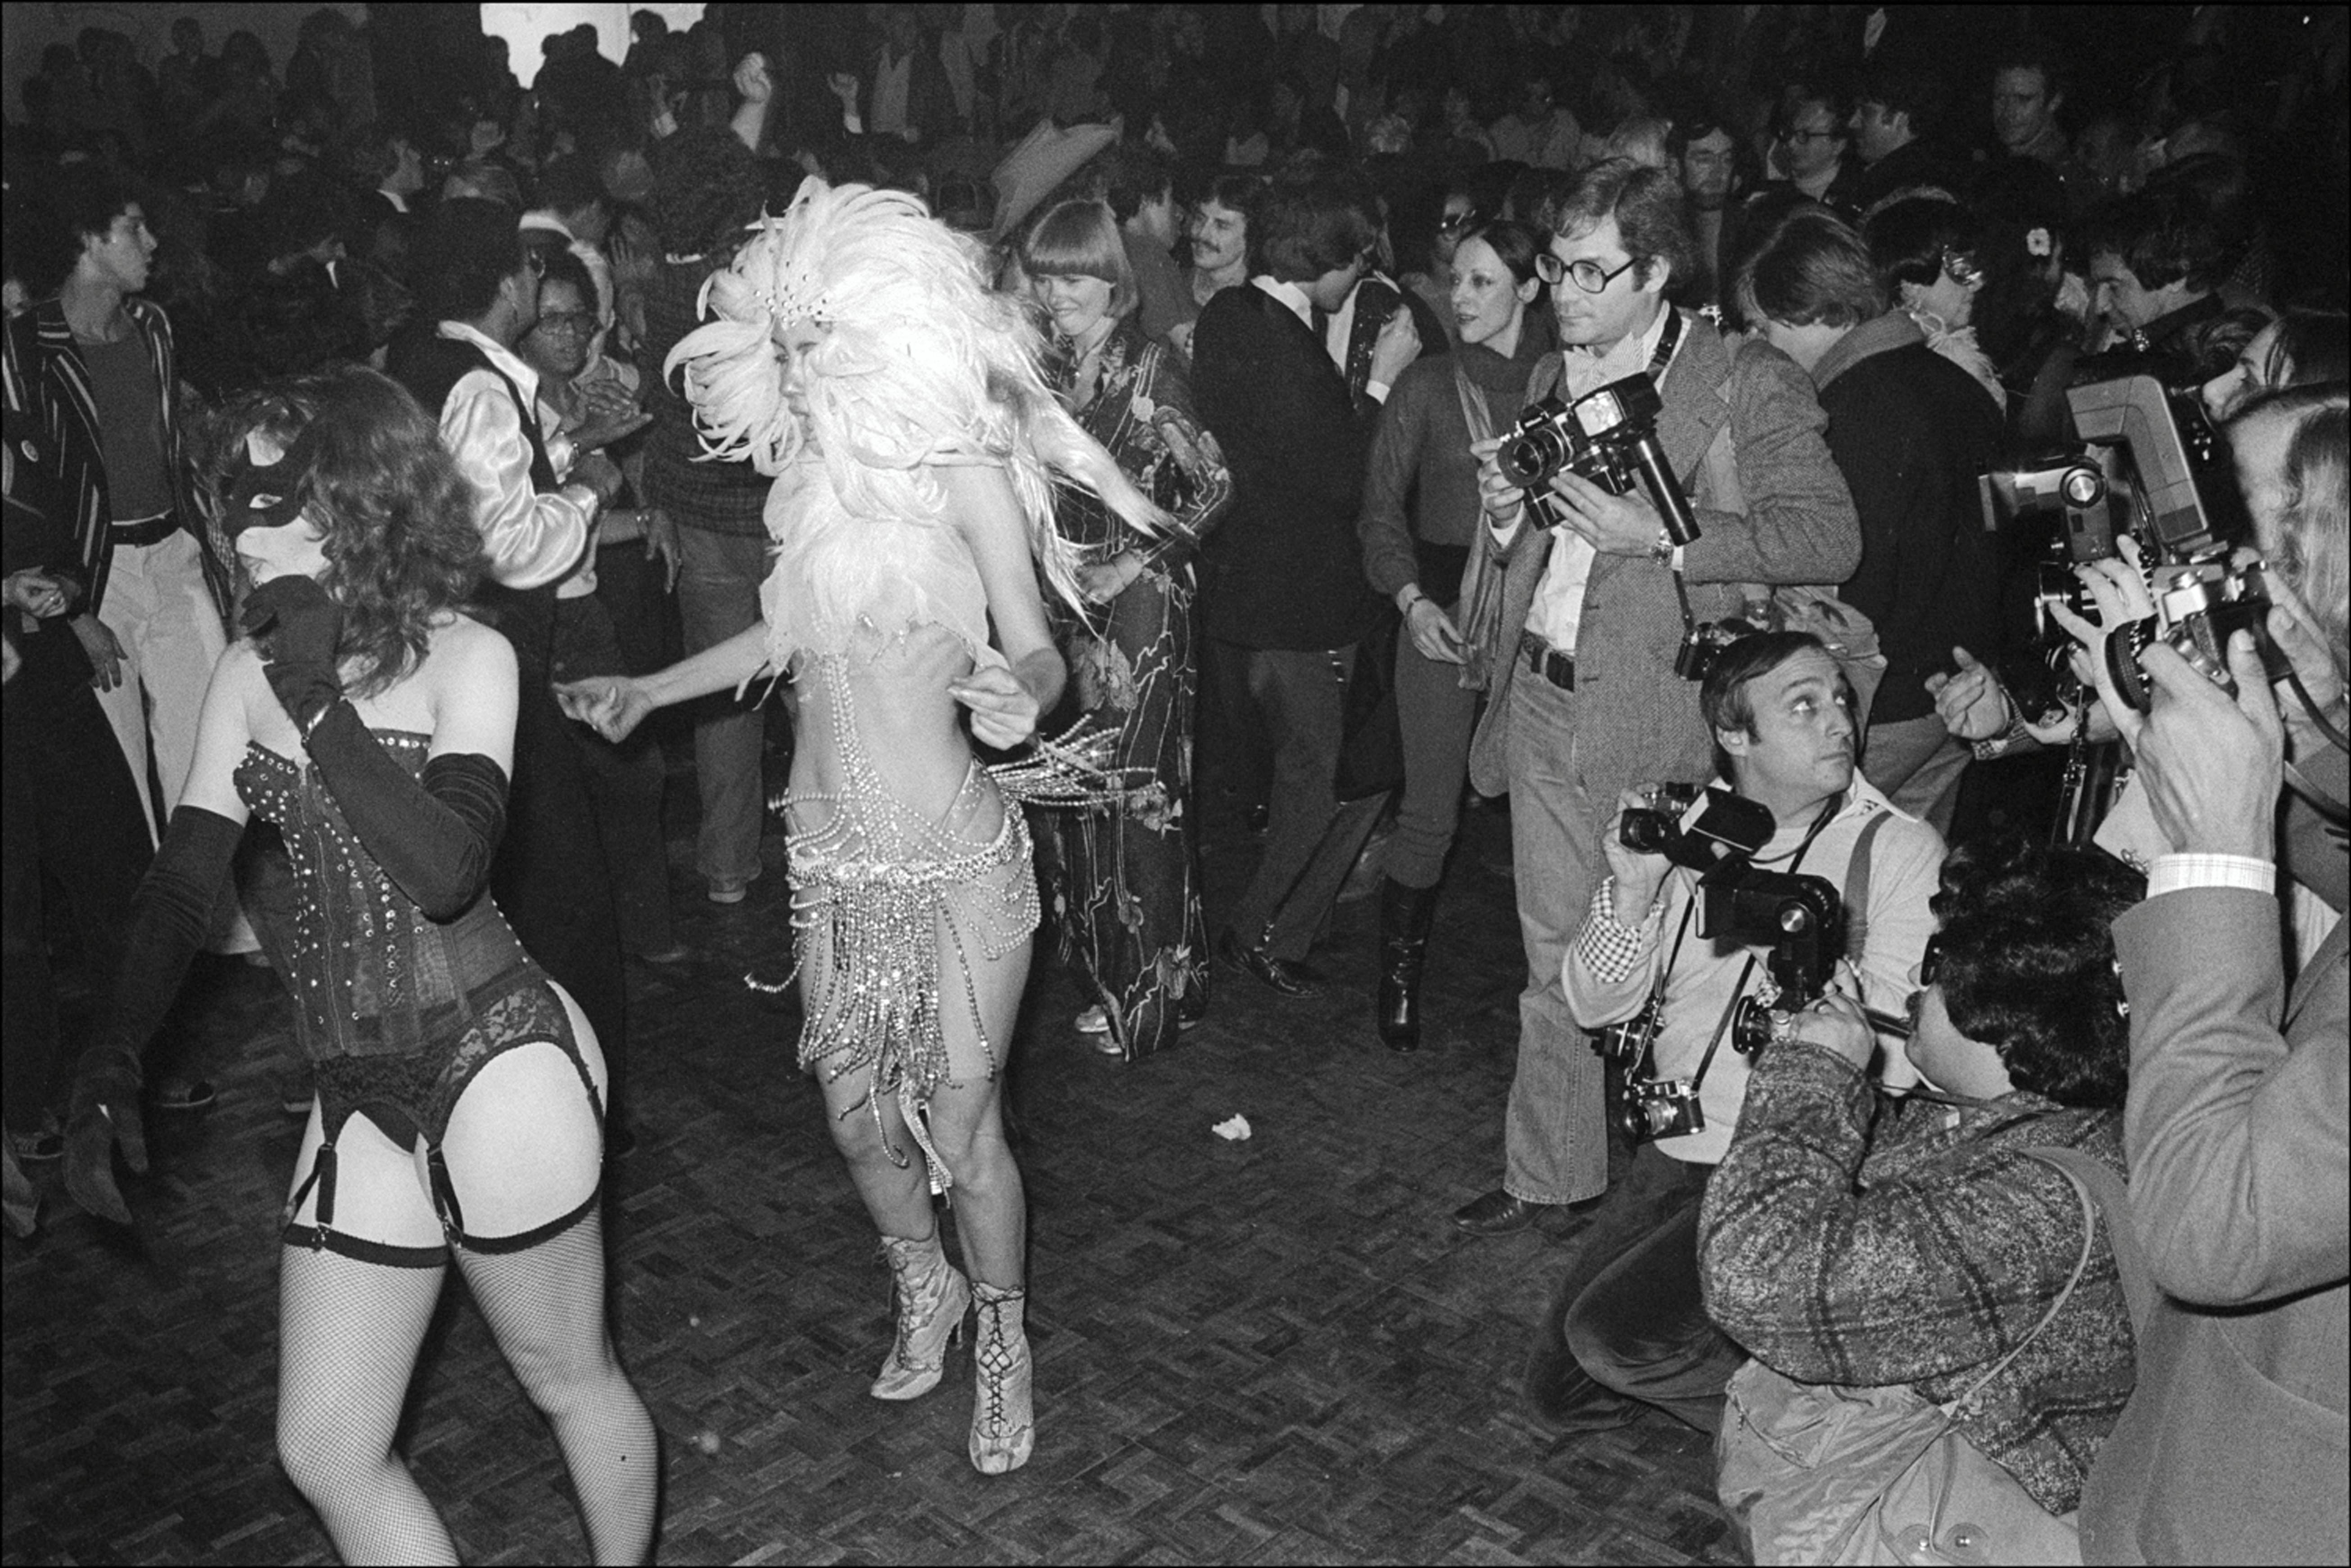 At the Hookers Ball, strippers, dancers, and activists took over San Francisco and partied for sex workers rights by Nina Renata Aron Timeline photo